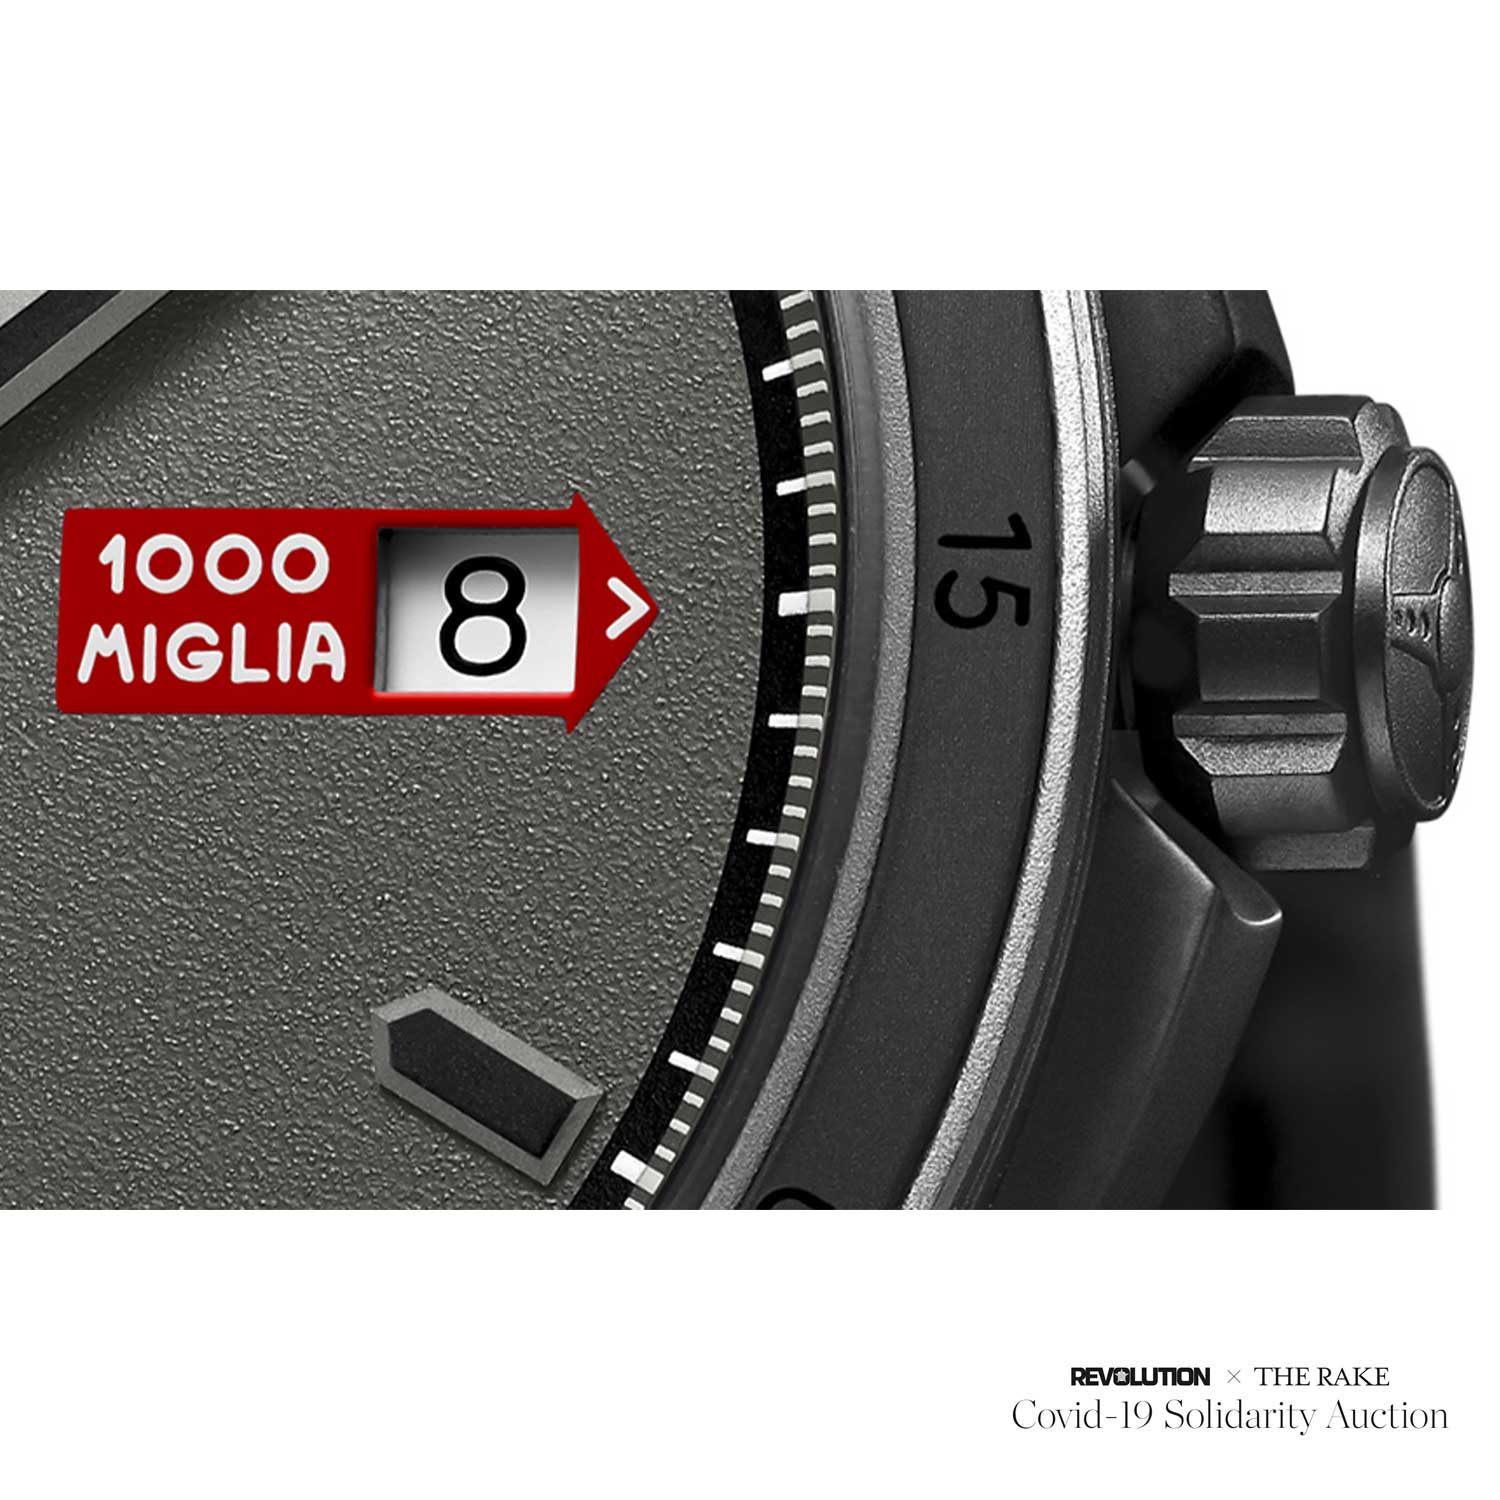 Closeup on the Mille Miglia GTS Power Control Grigrio Speciale prototype dial showcasing the sandblasted texture